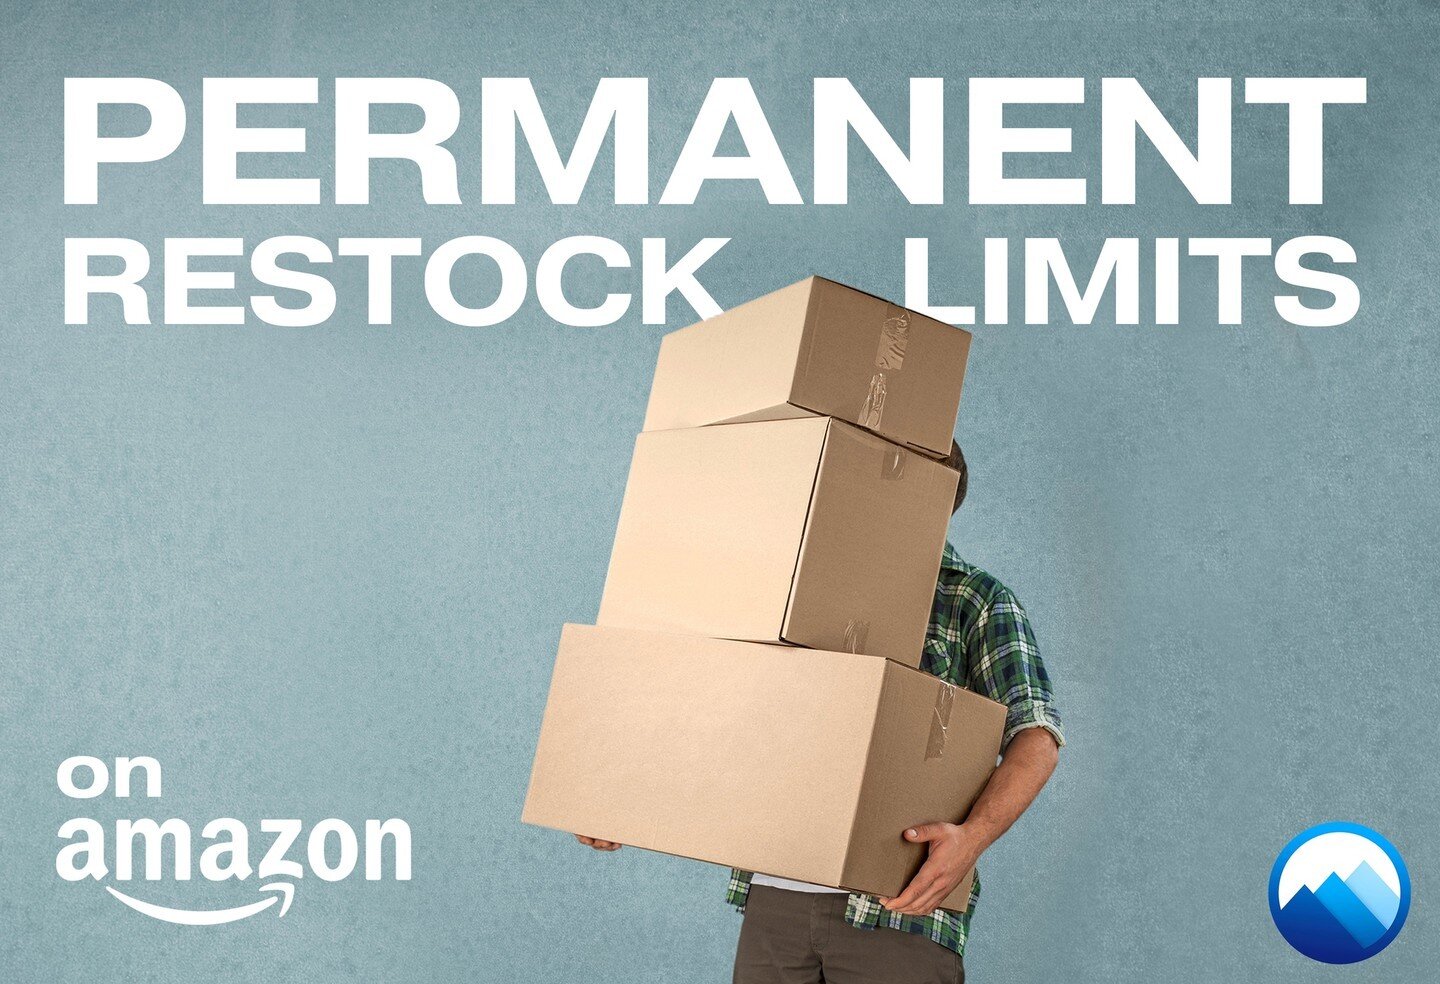 Not long ago, there was no such thing as a restock limit on Amazon FBA. ⁠
⁠
To avoid a complete meltdown after COVID's workforce shortages, Amazon introduced restock limits.⁠
⁠
Restock Limits forced many sellers to go out of stock of best selling pro